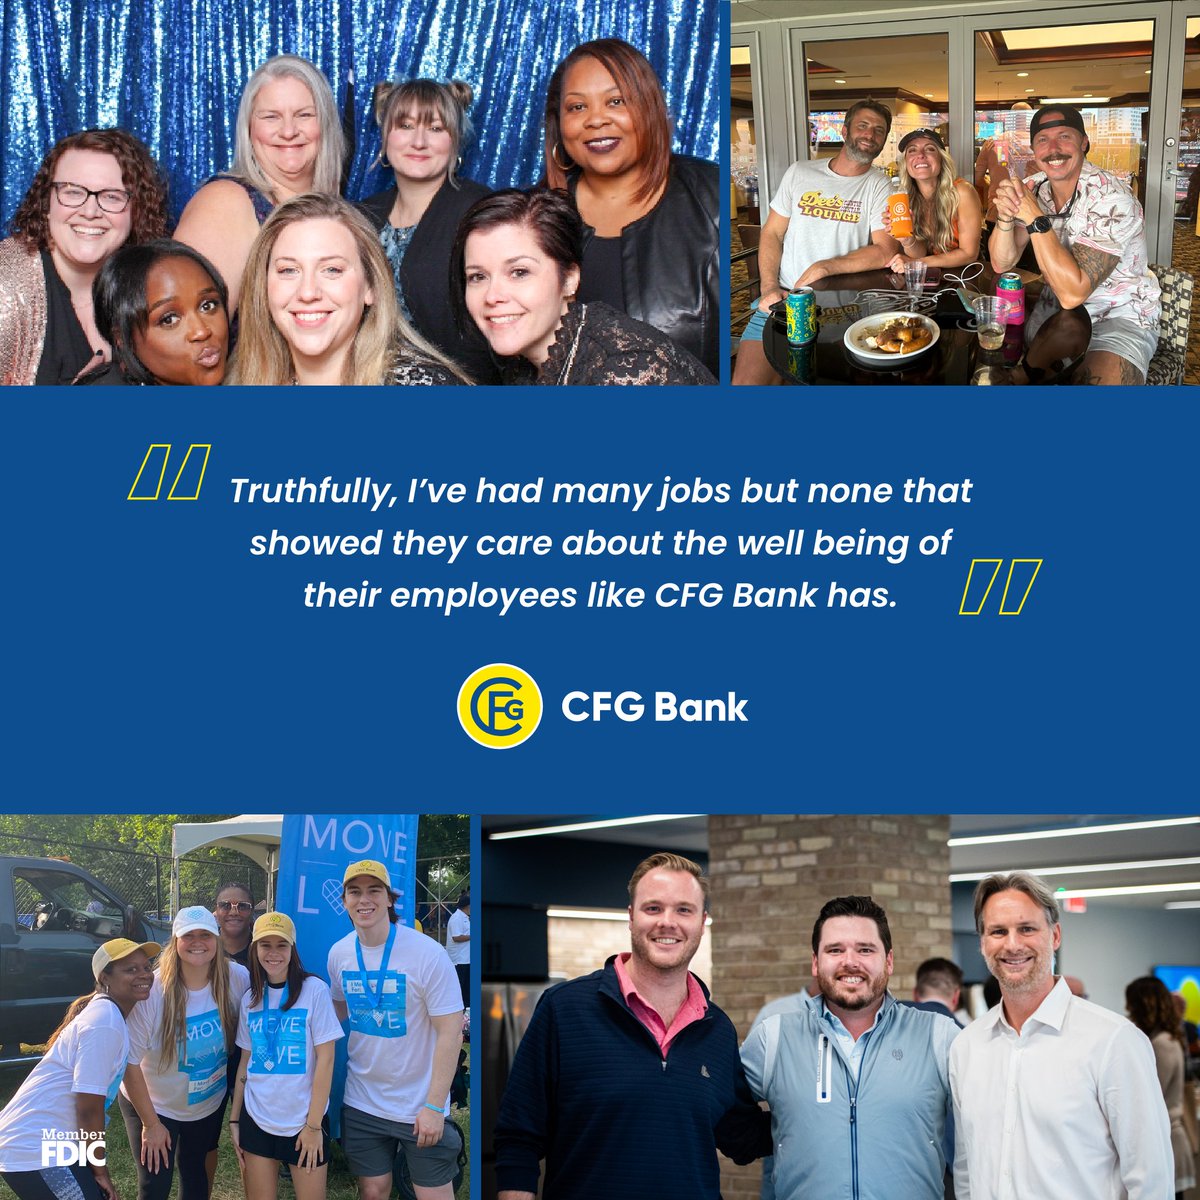 We’re dedicated to helping our team members reach their professional and personal goals, which is a cornerstone of our comprehensive Wellness Program. Learn more about working at CFG and check out our open positions: cfg.bank/about/careers/.